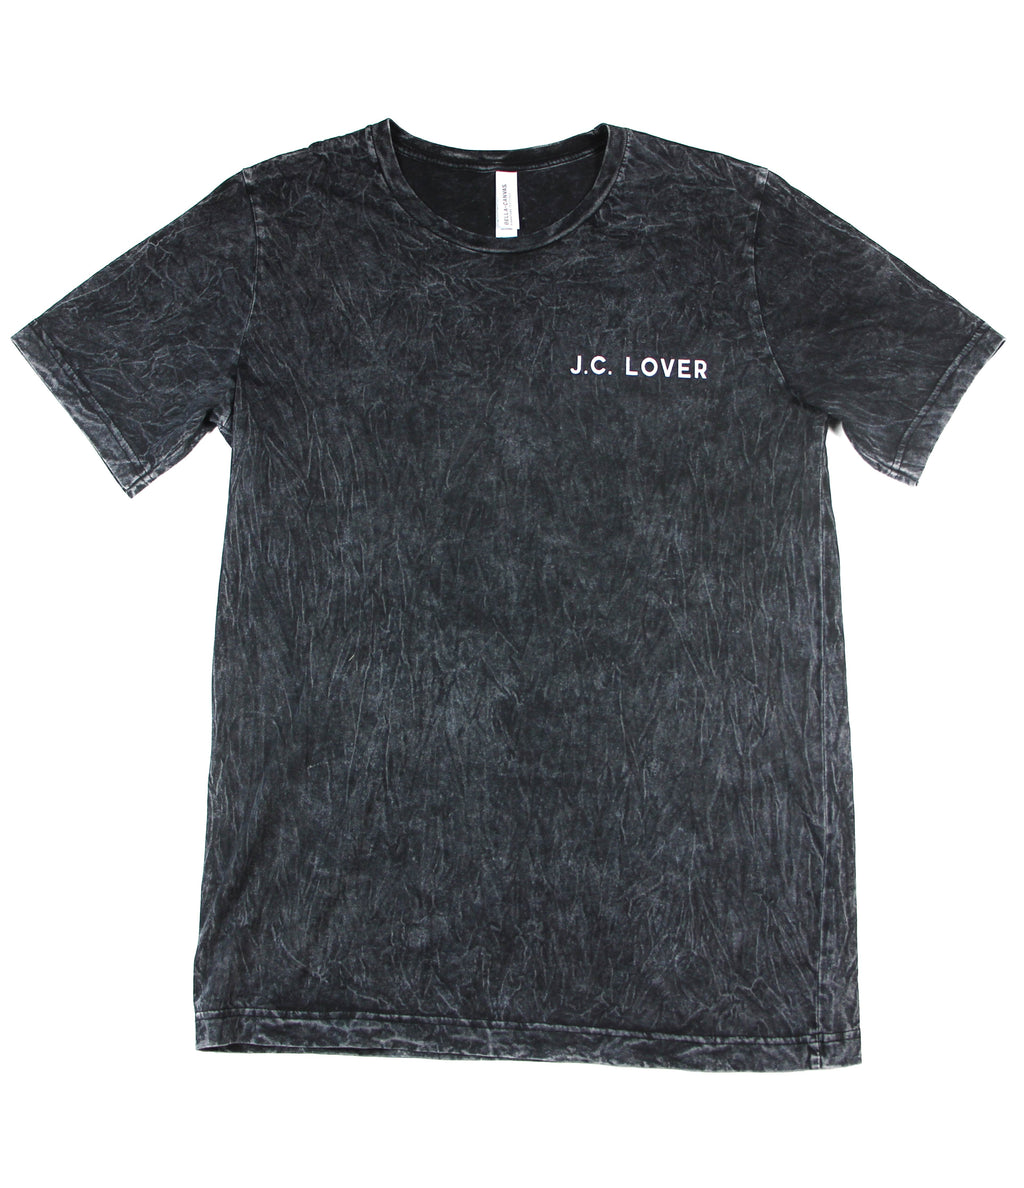 J.C. LOVER MINERAL WASH TEE